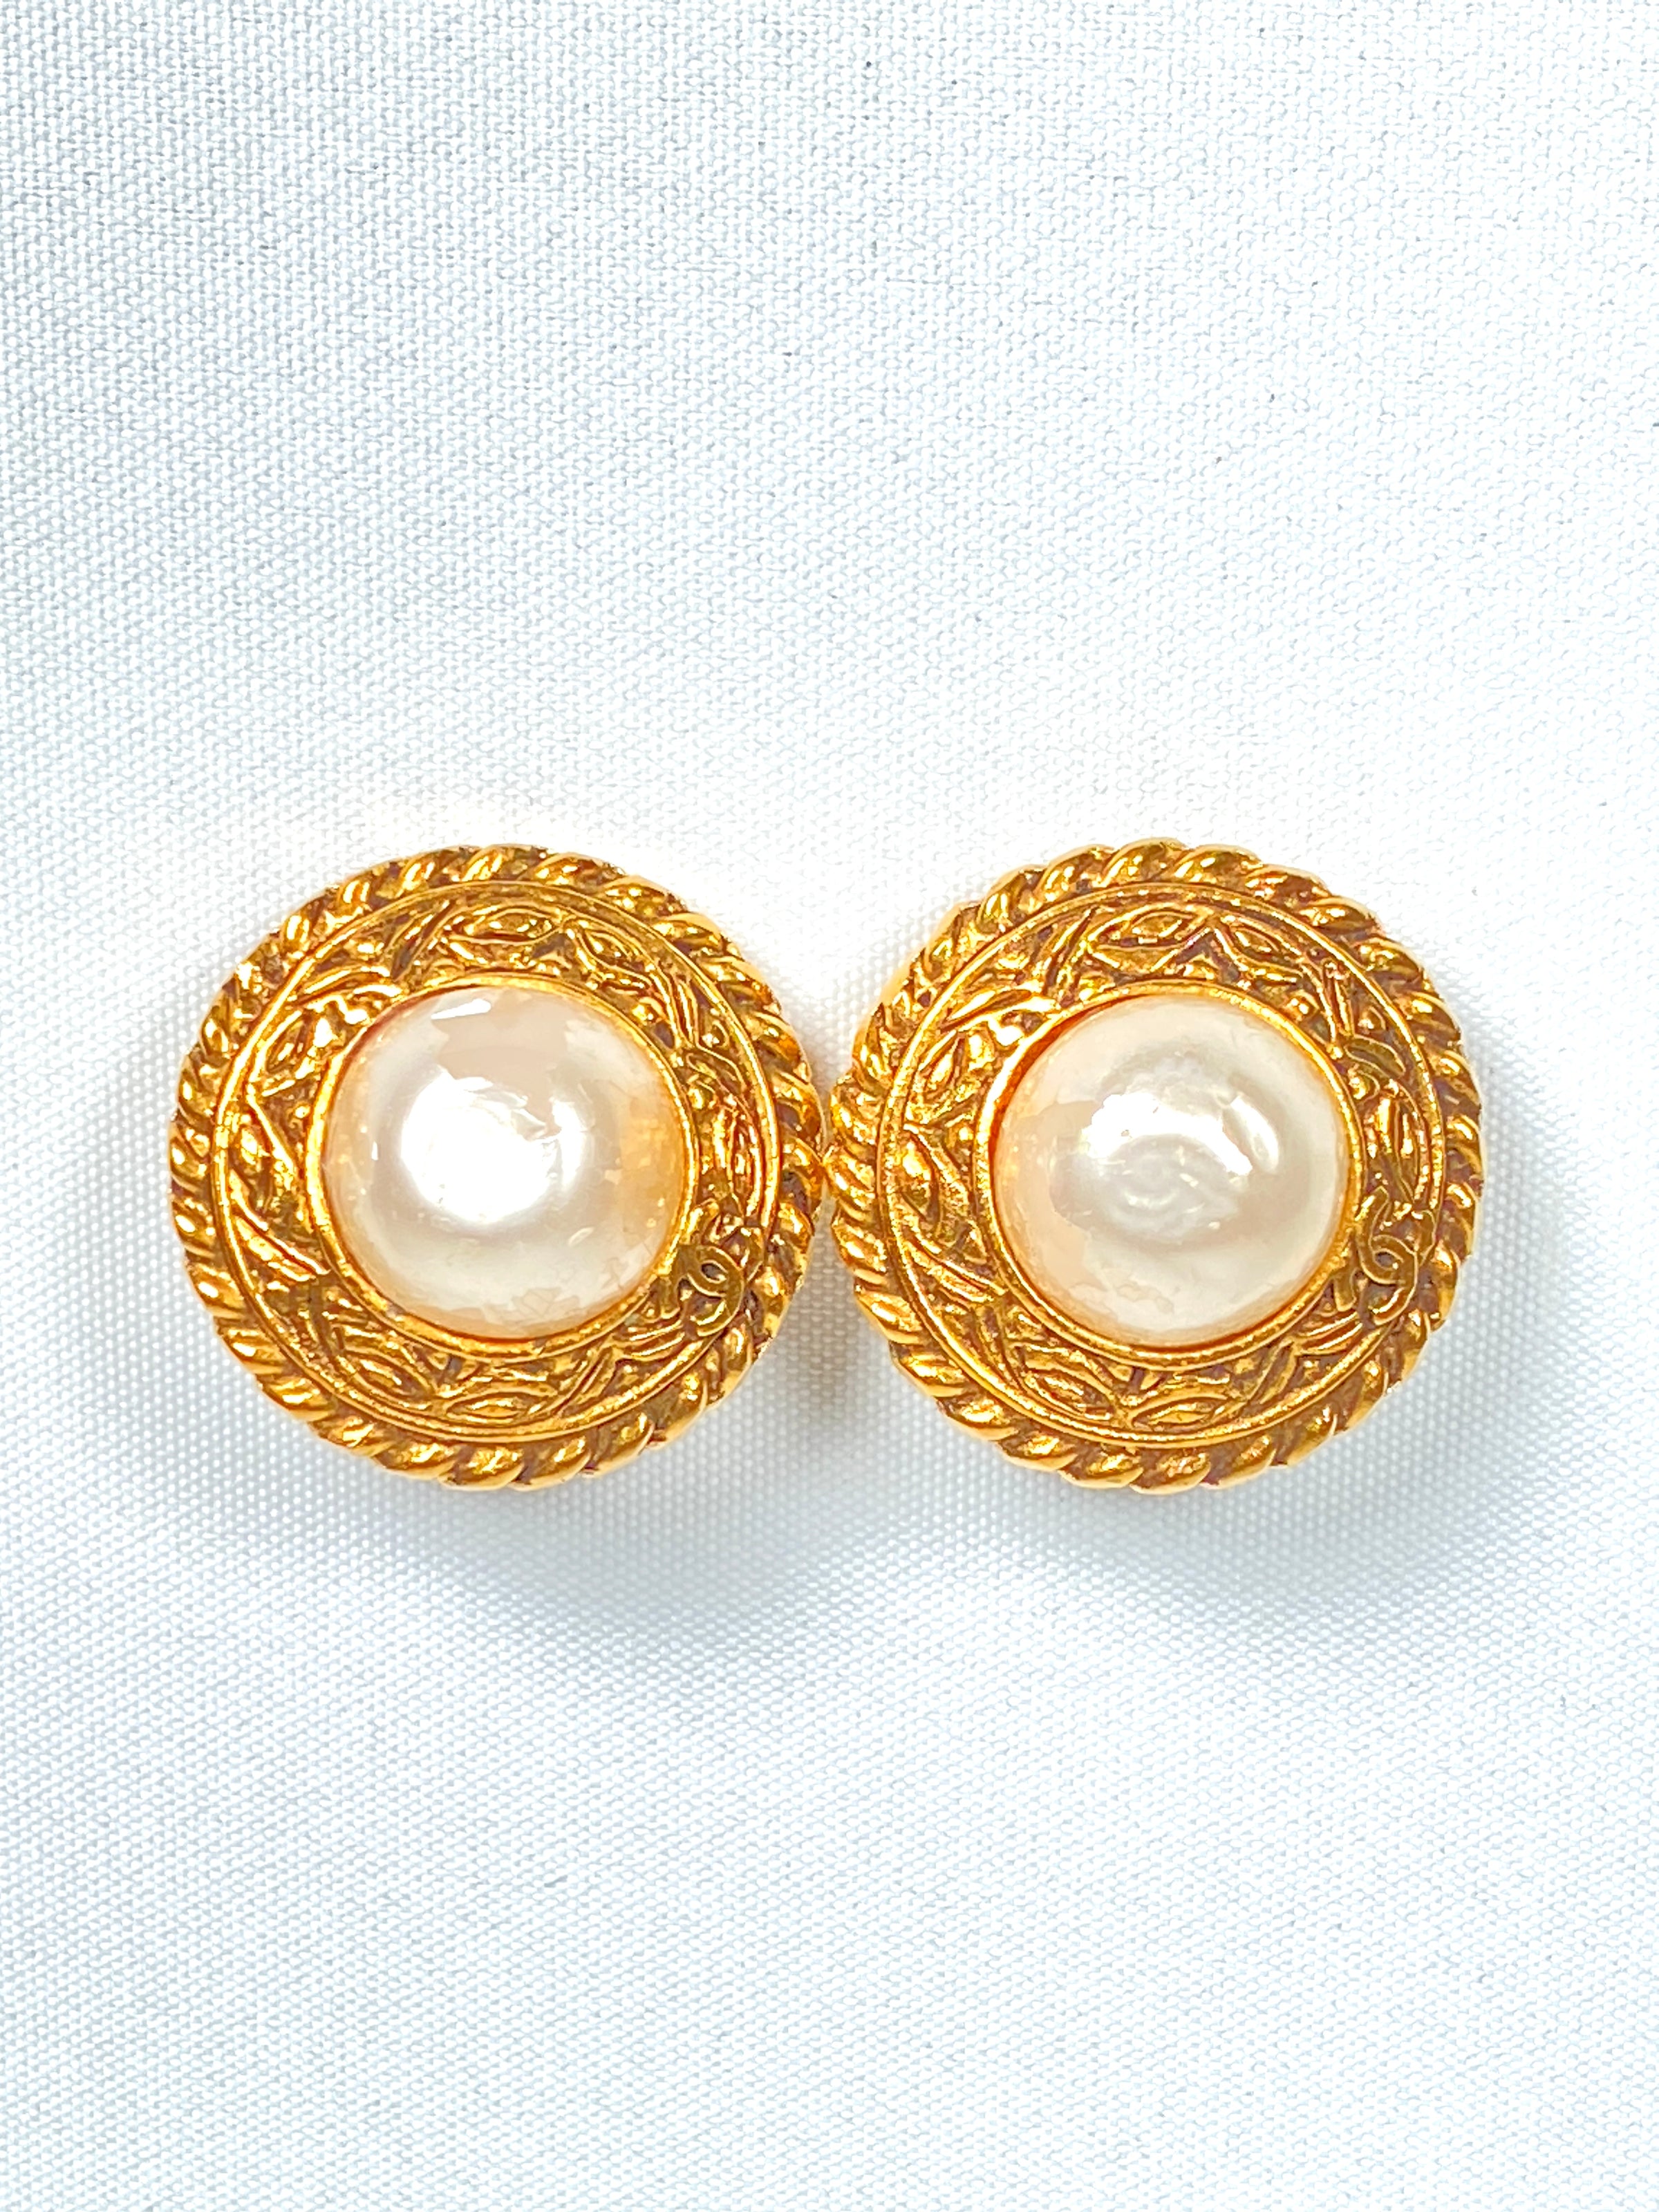 Buy Vintage CHANEL Golden Round Shape Faux Pearl Earrings With